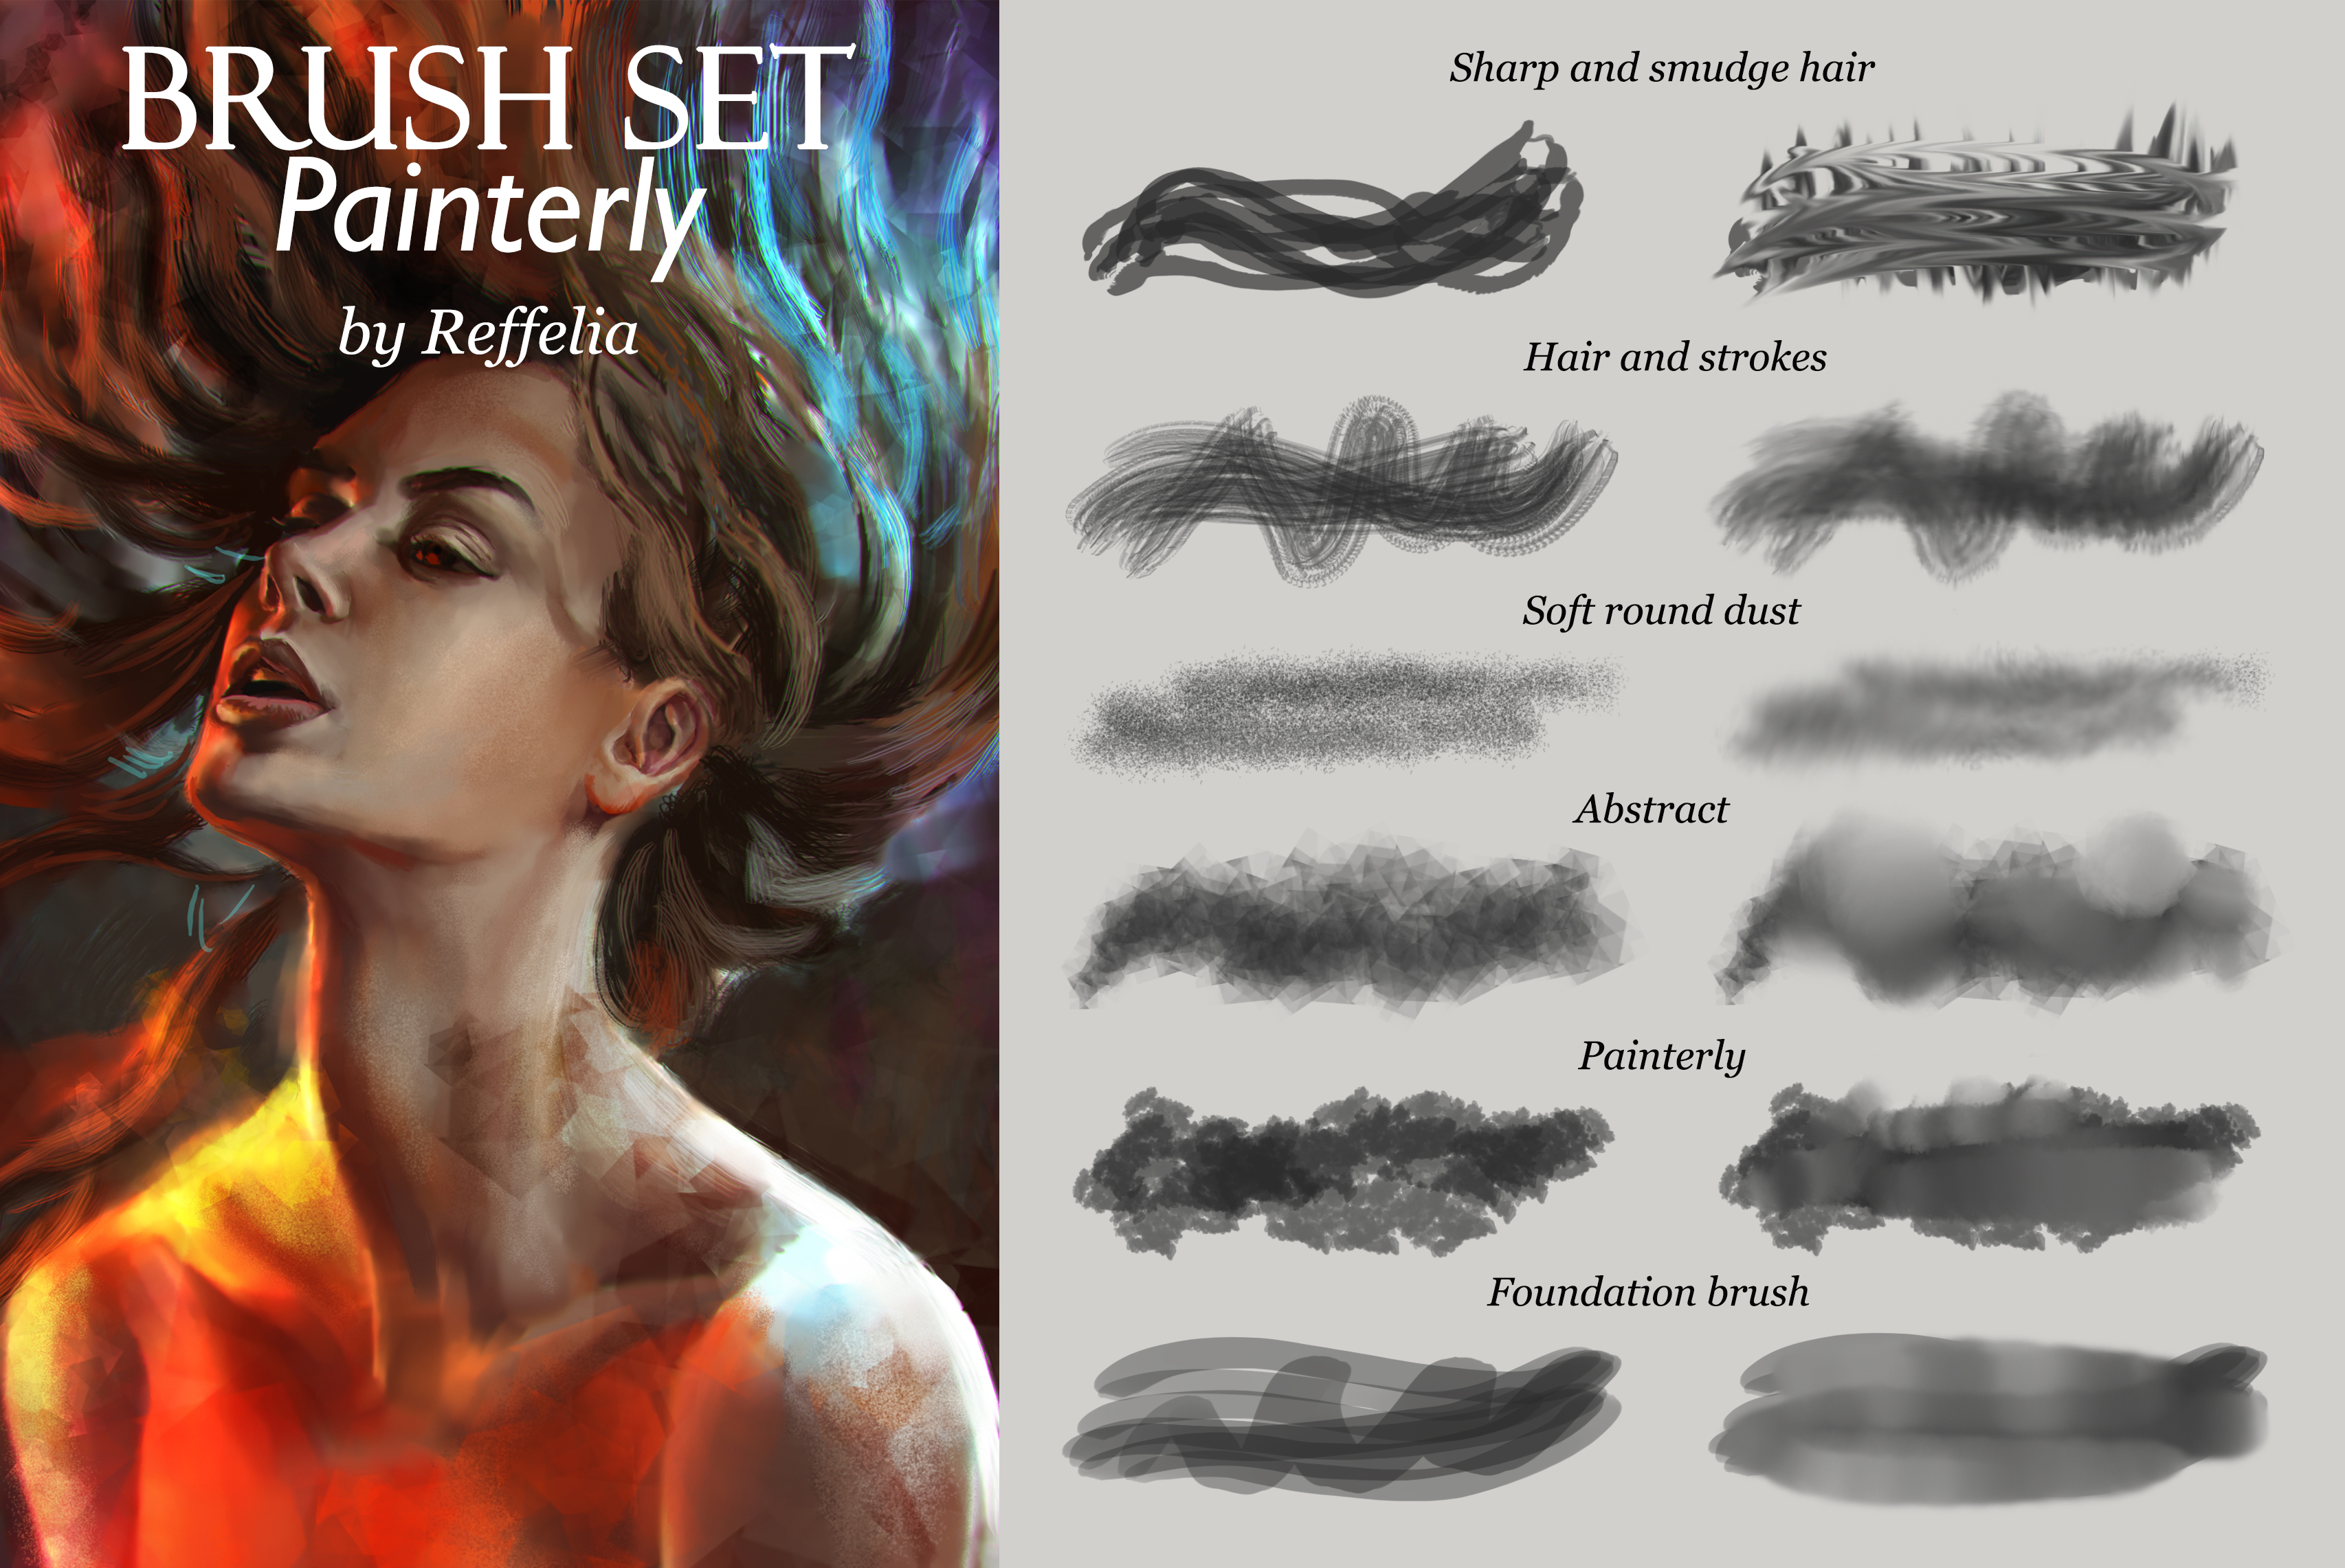 3 Brushes for Painting Fabric in Photoshop by pixelstains on DeviantArt